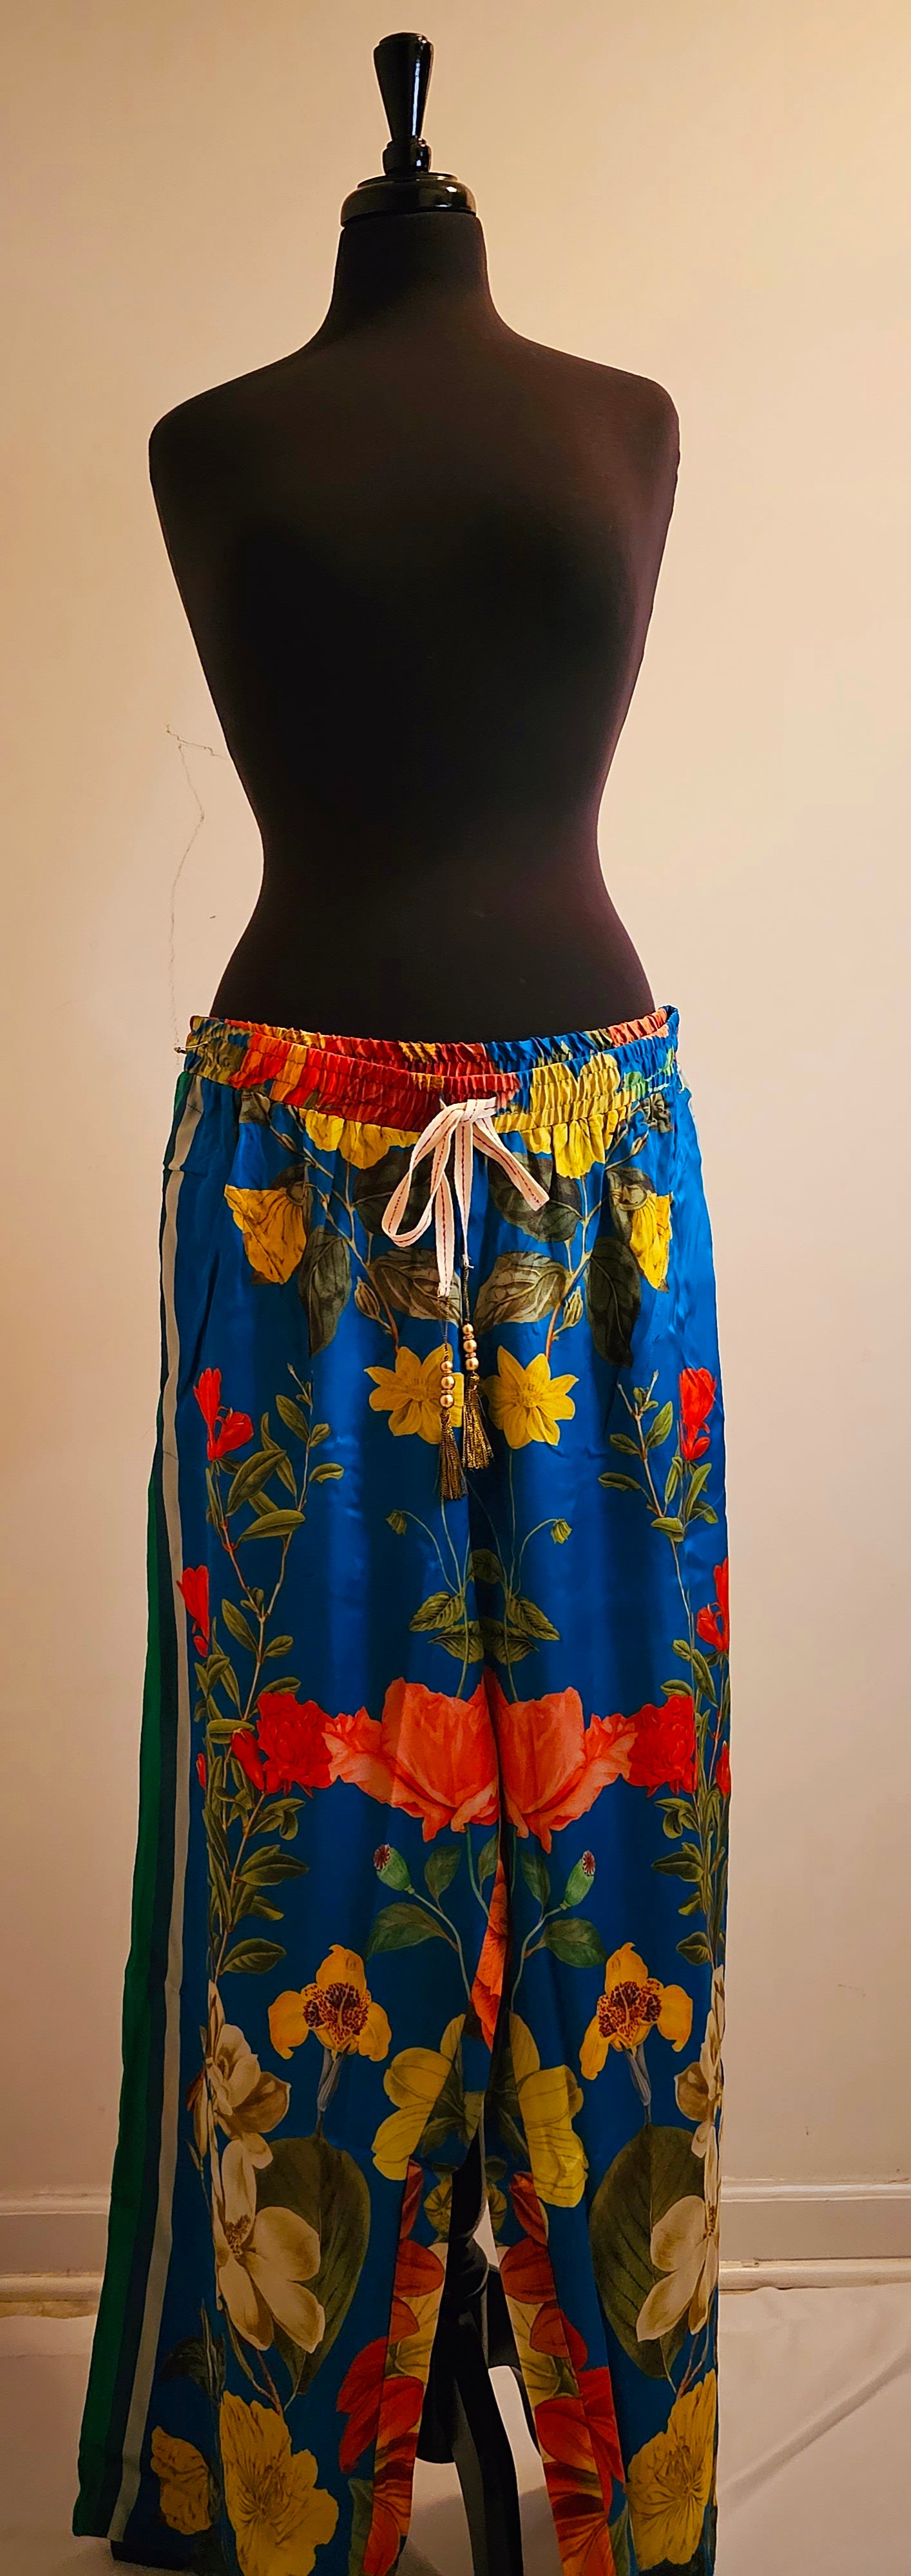 FRENCH RIVIERA COLBALT BLUE FLORAL PANTS